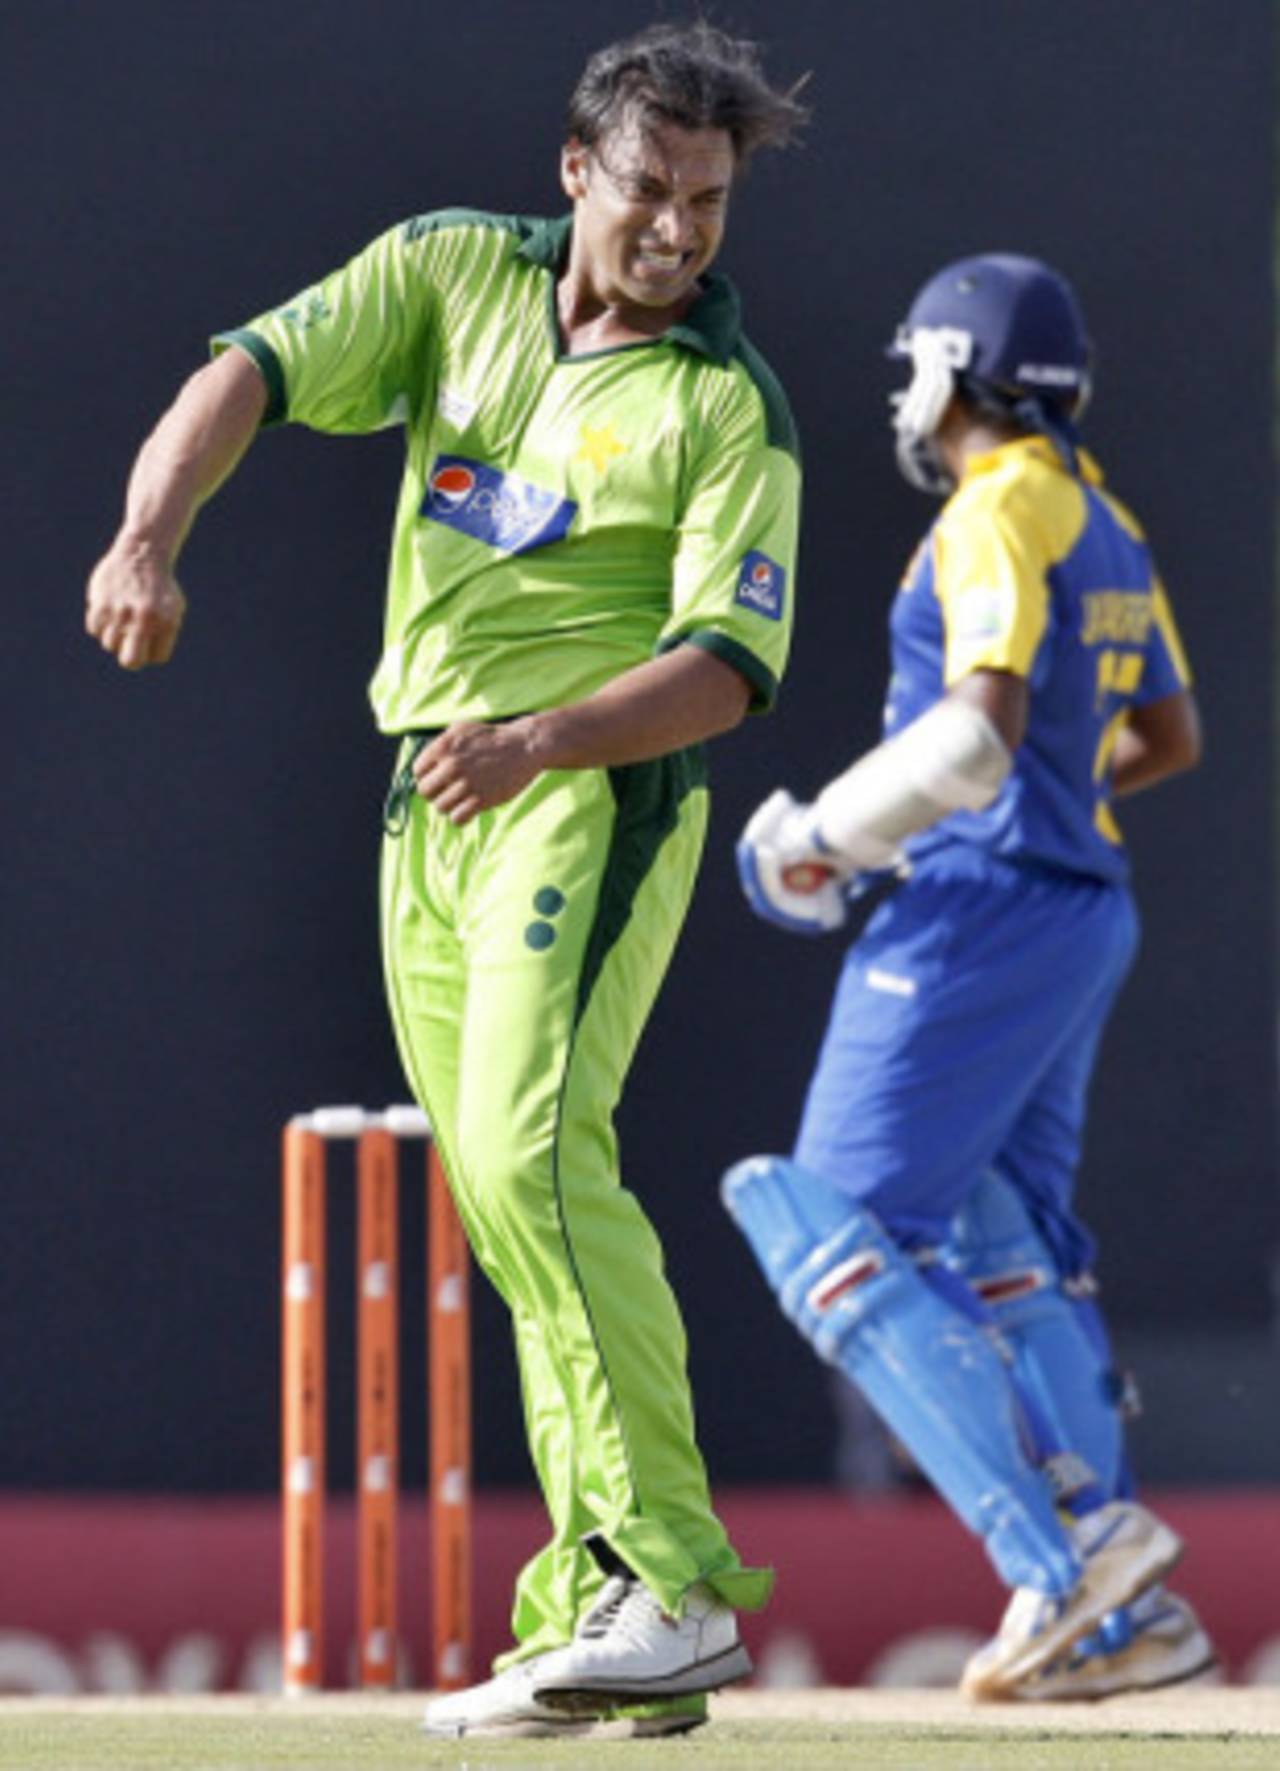 A slower, shorter run-up, but easily the fastest bowler for the day; a few kgs lighter, but not at peak fitness - Shoaib Akhtar settled for middle ground on his comeback&nbsp;&nbsp;&bull;&nbsp;&nbsp;Associated Press